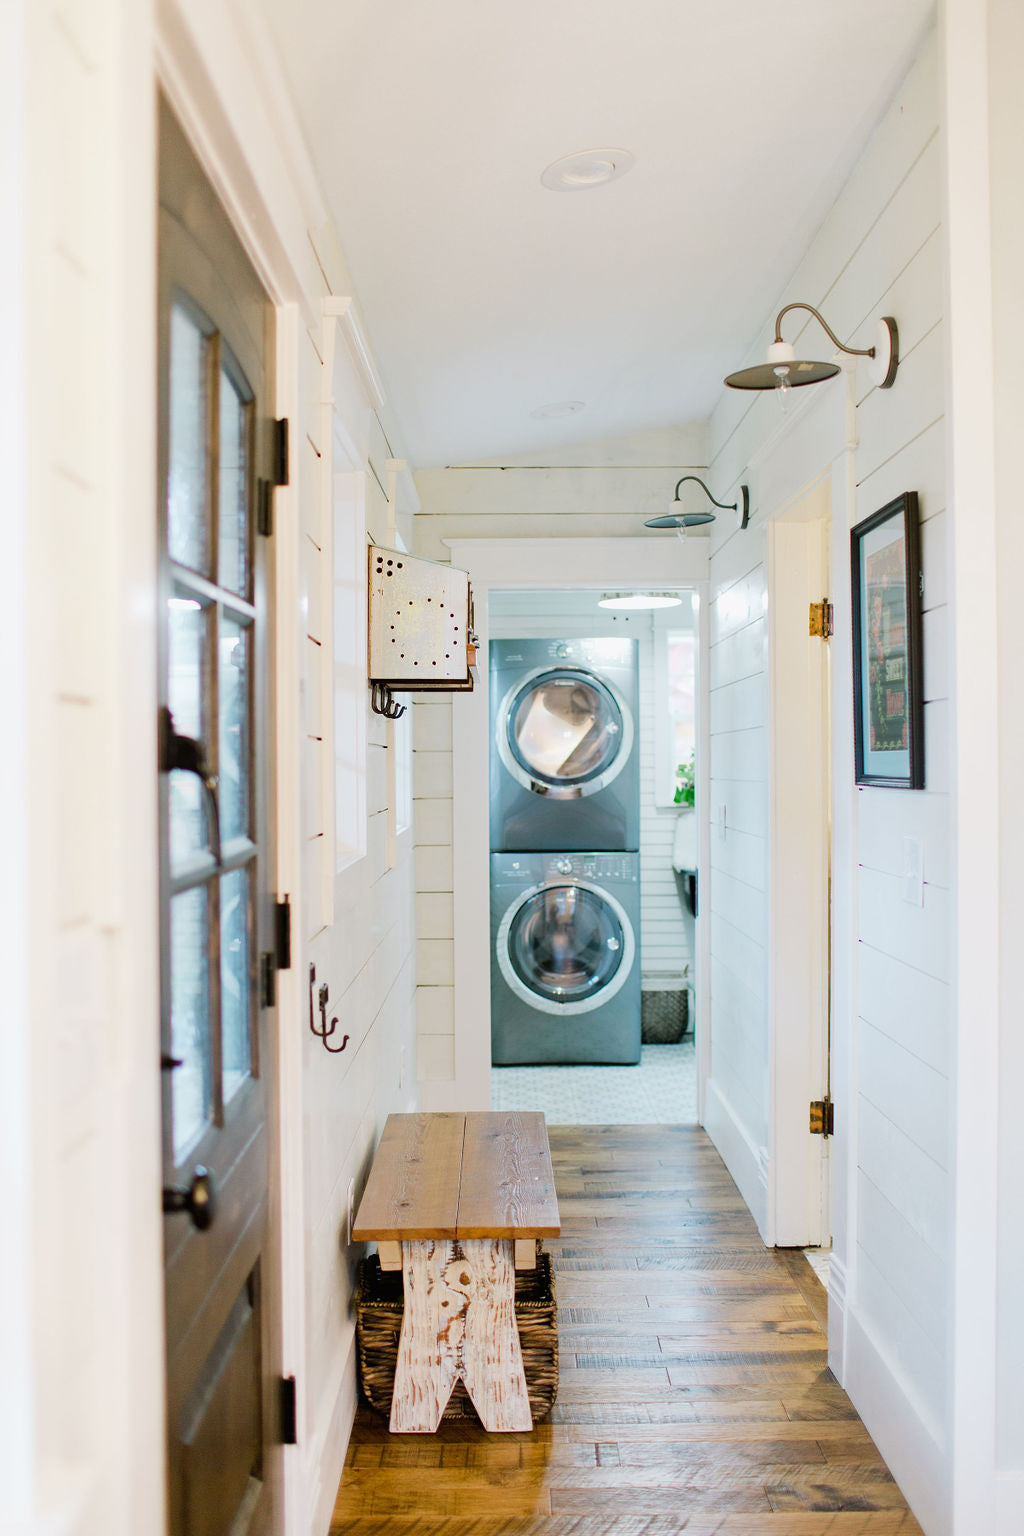 White hallway to a laundry room with country accents like rustic bench and shiplap